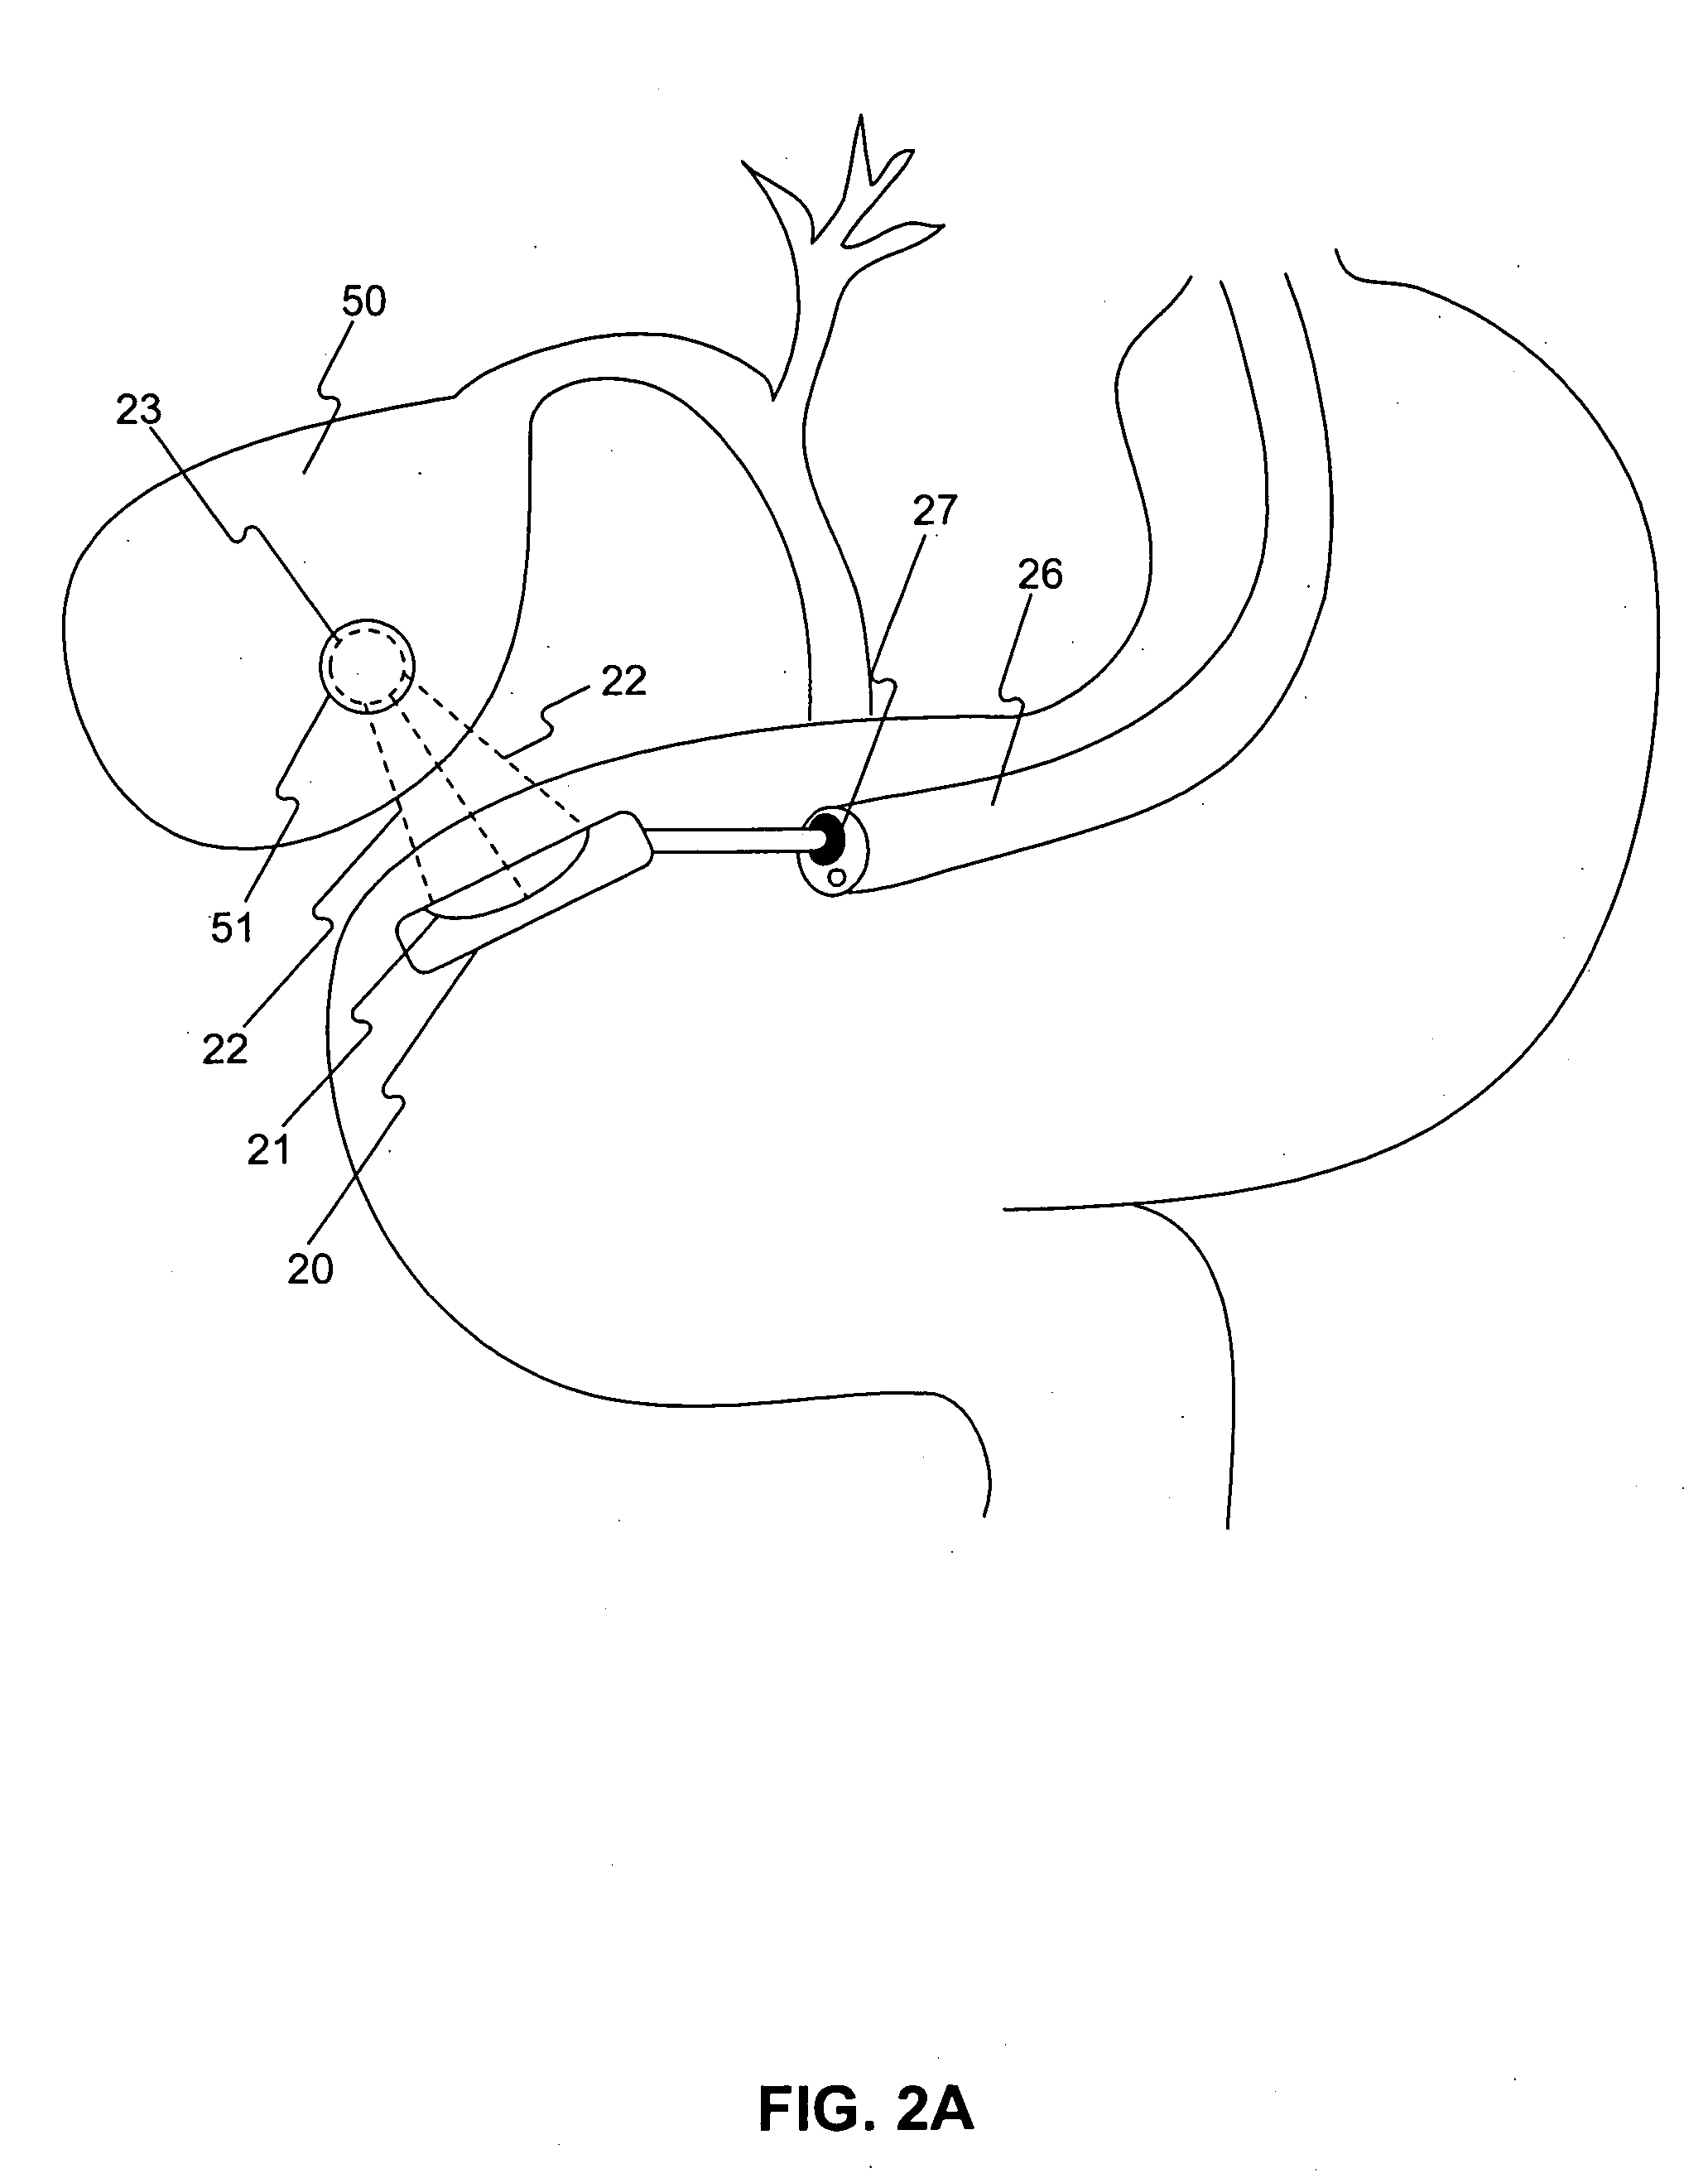 Methods of delivering energy to body portions to produce a therapeutic response